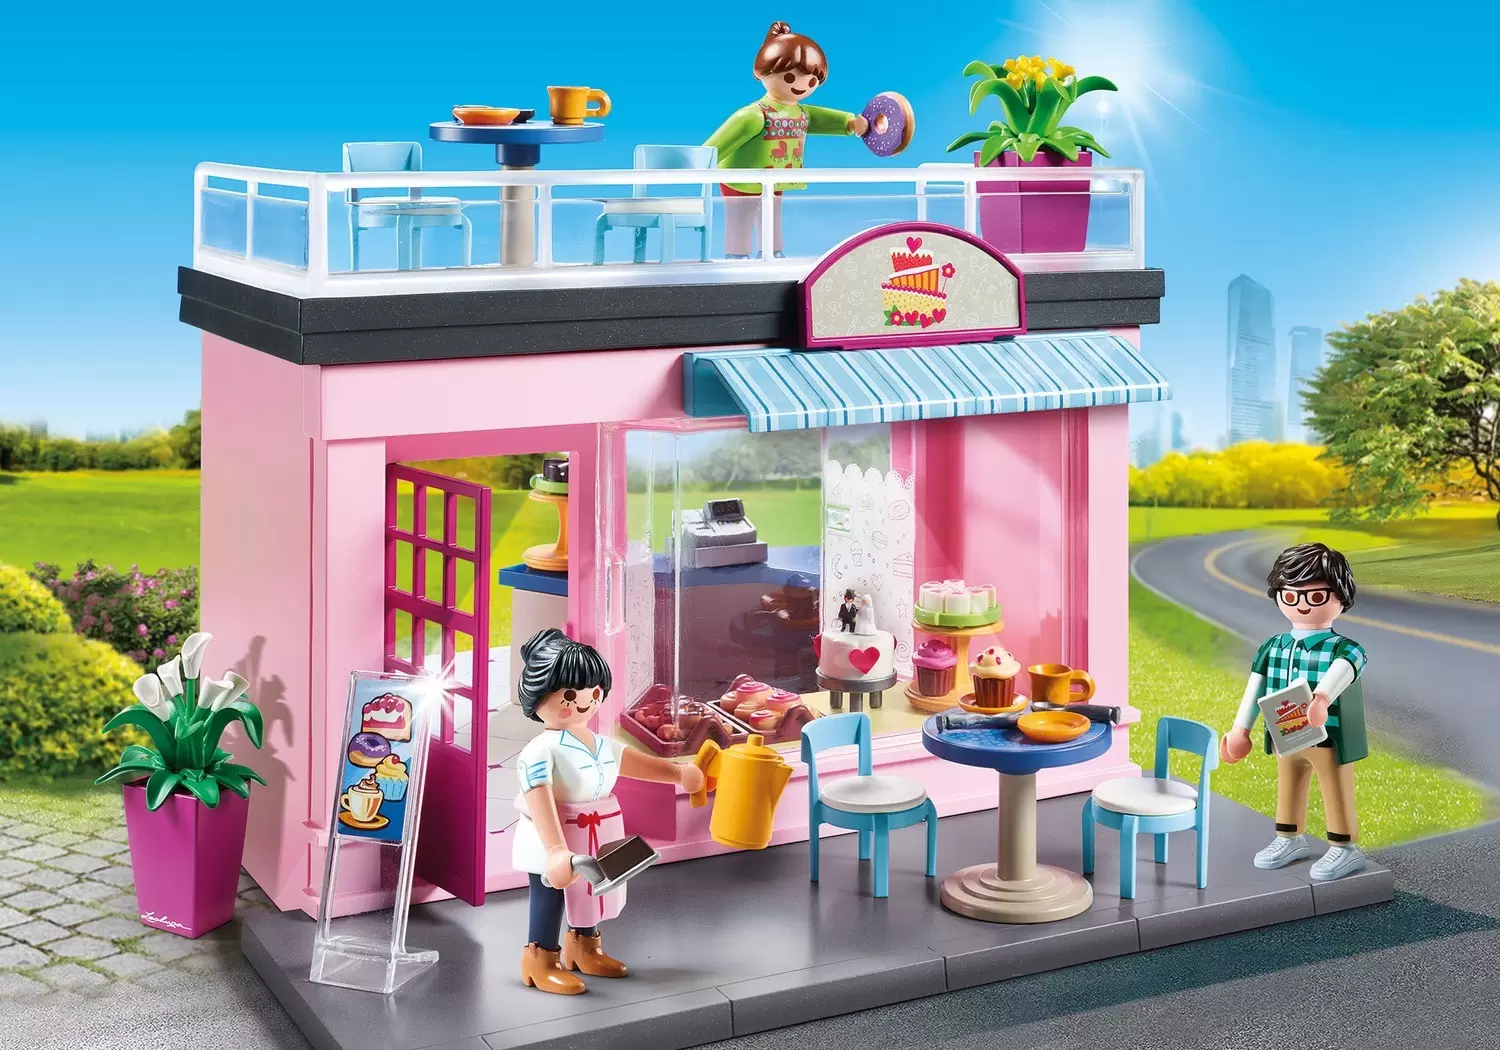 Playmobil Houses and Furniture - My favorite café